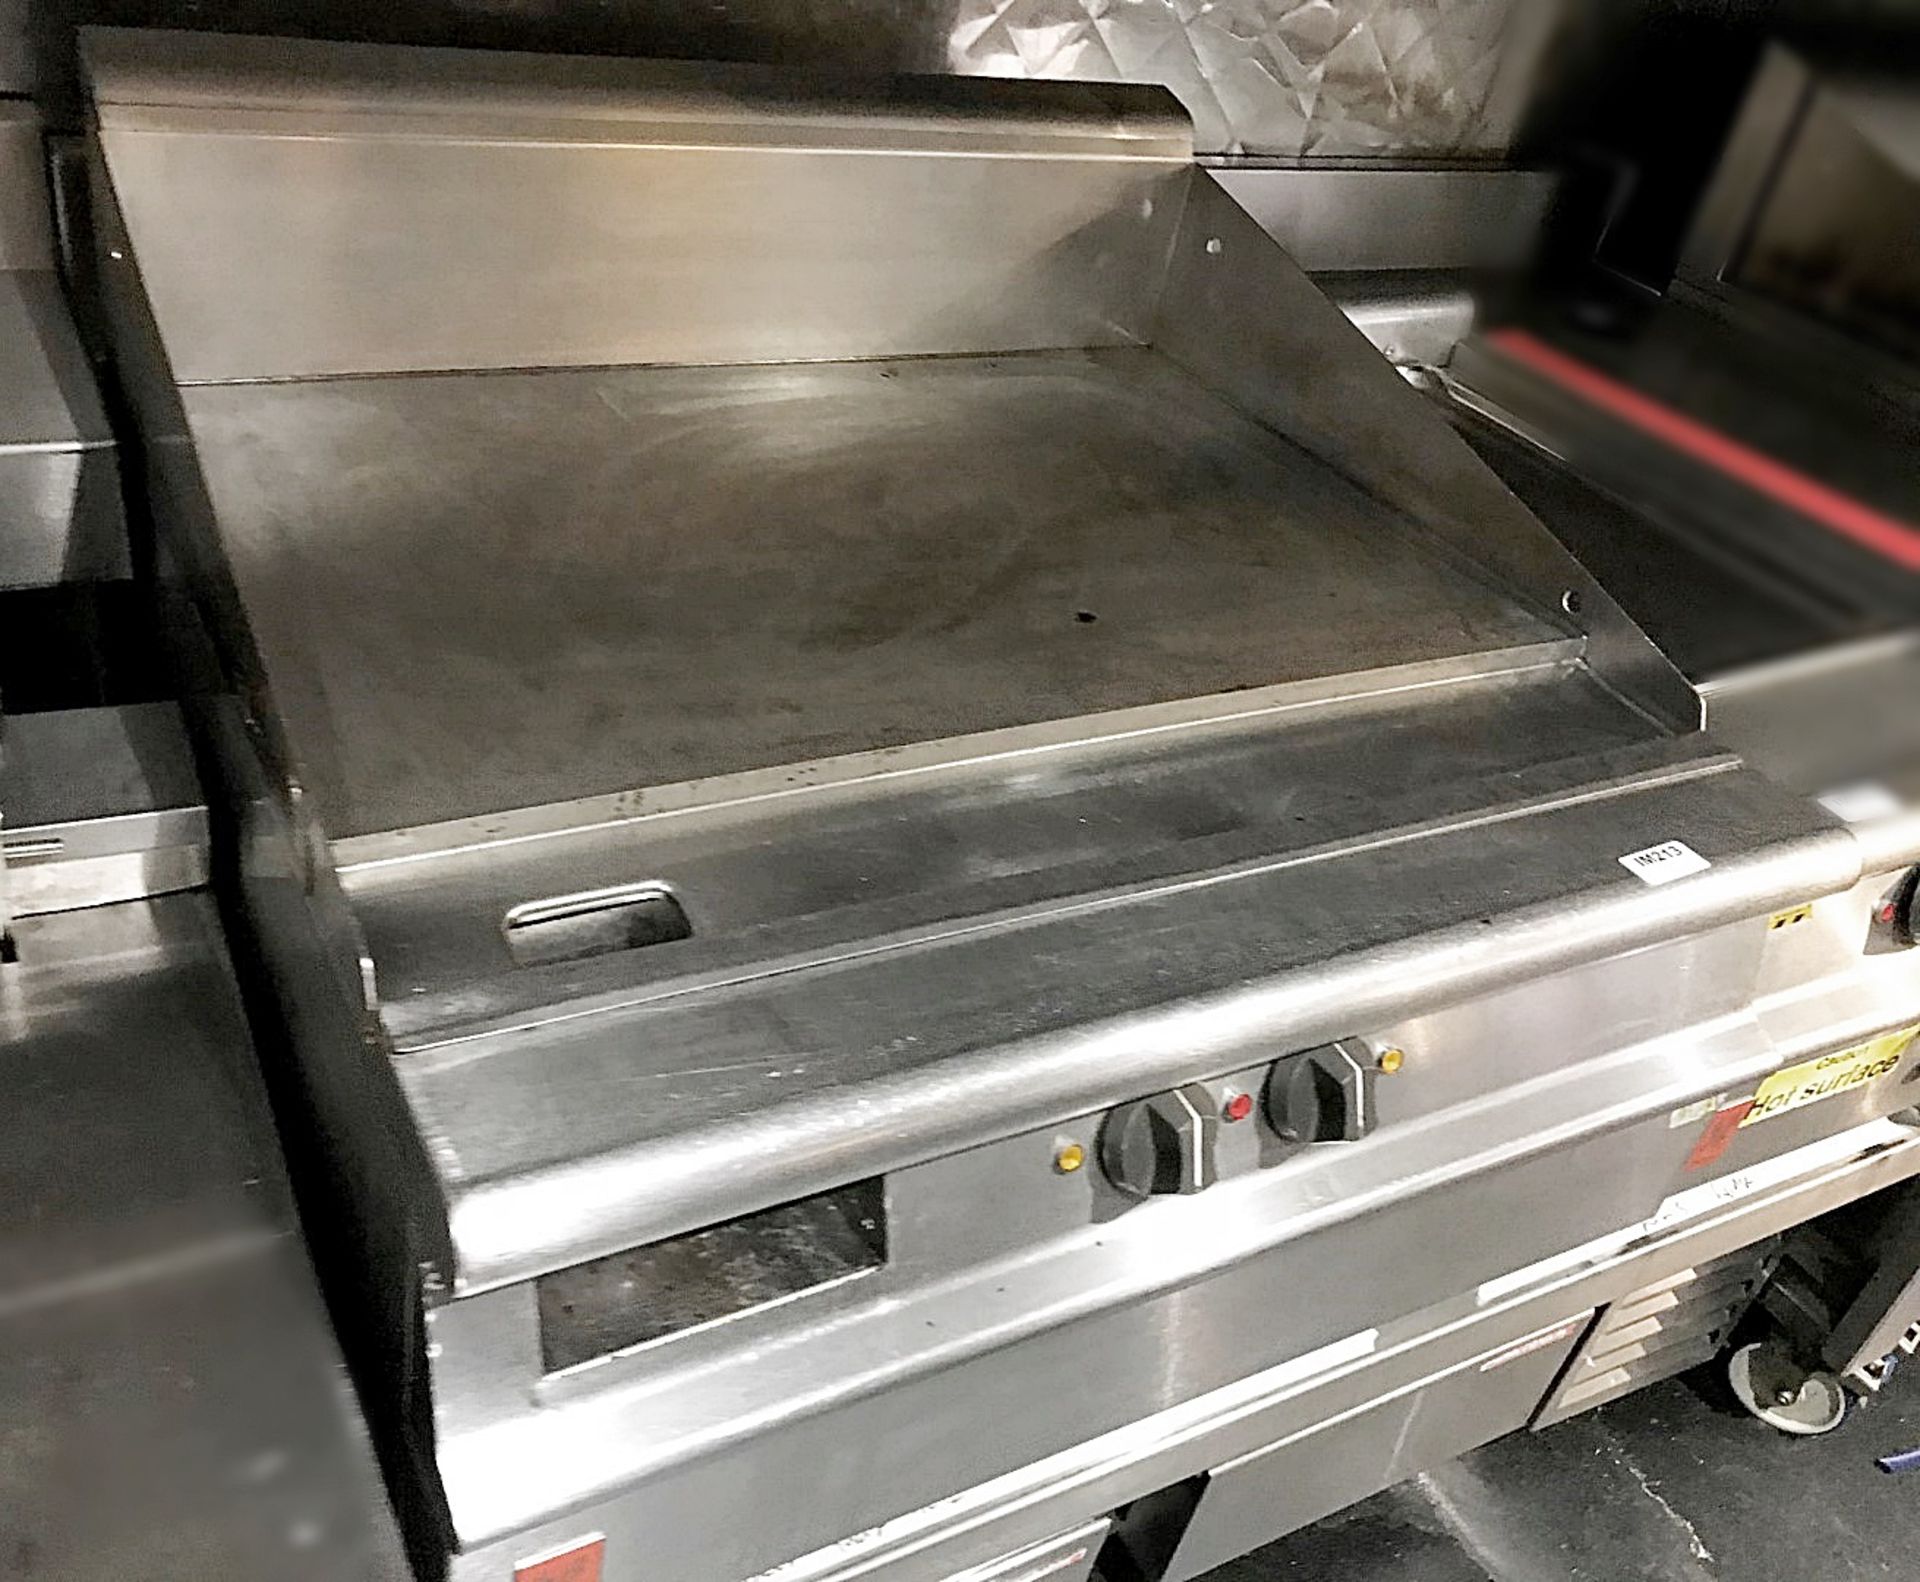 1 x Falcon Countertop Griddle With Solid Top - H44 x 80 x 80 cms - CL554 - Ref IM213 - Location: - Image 2 of 2